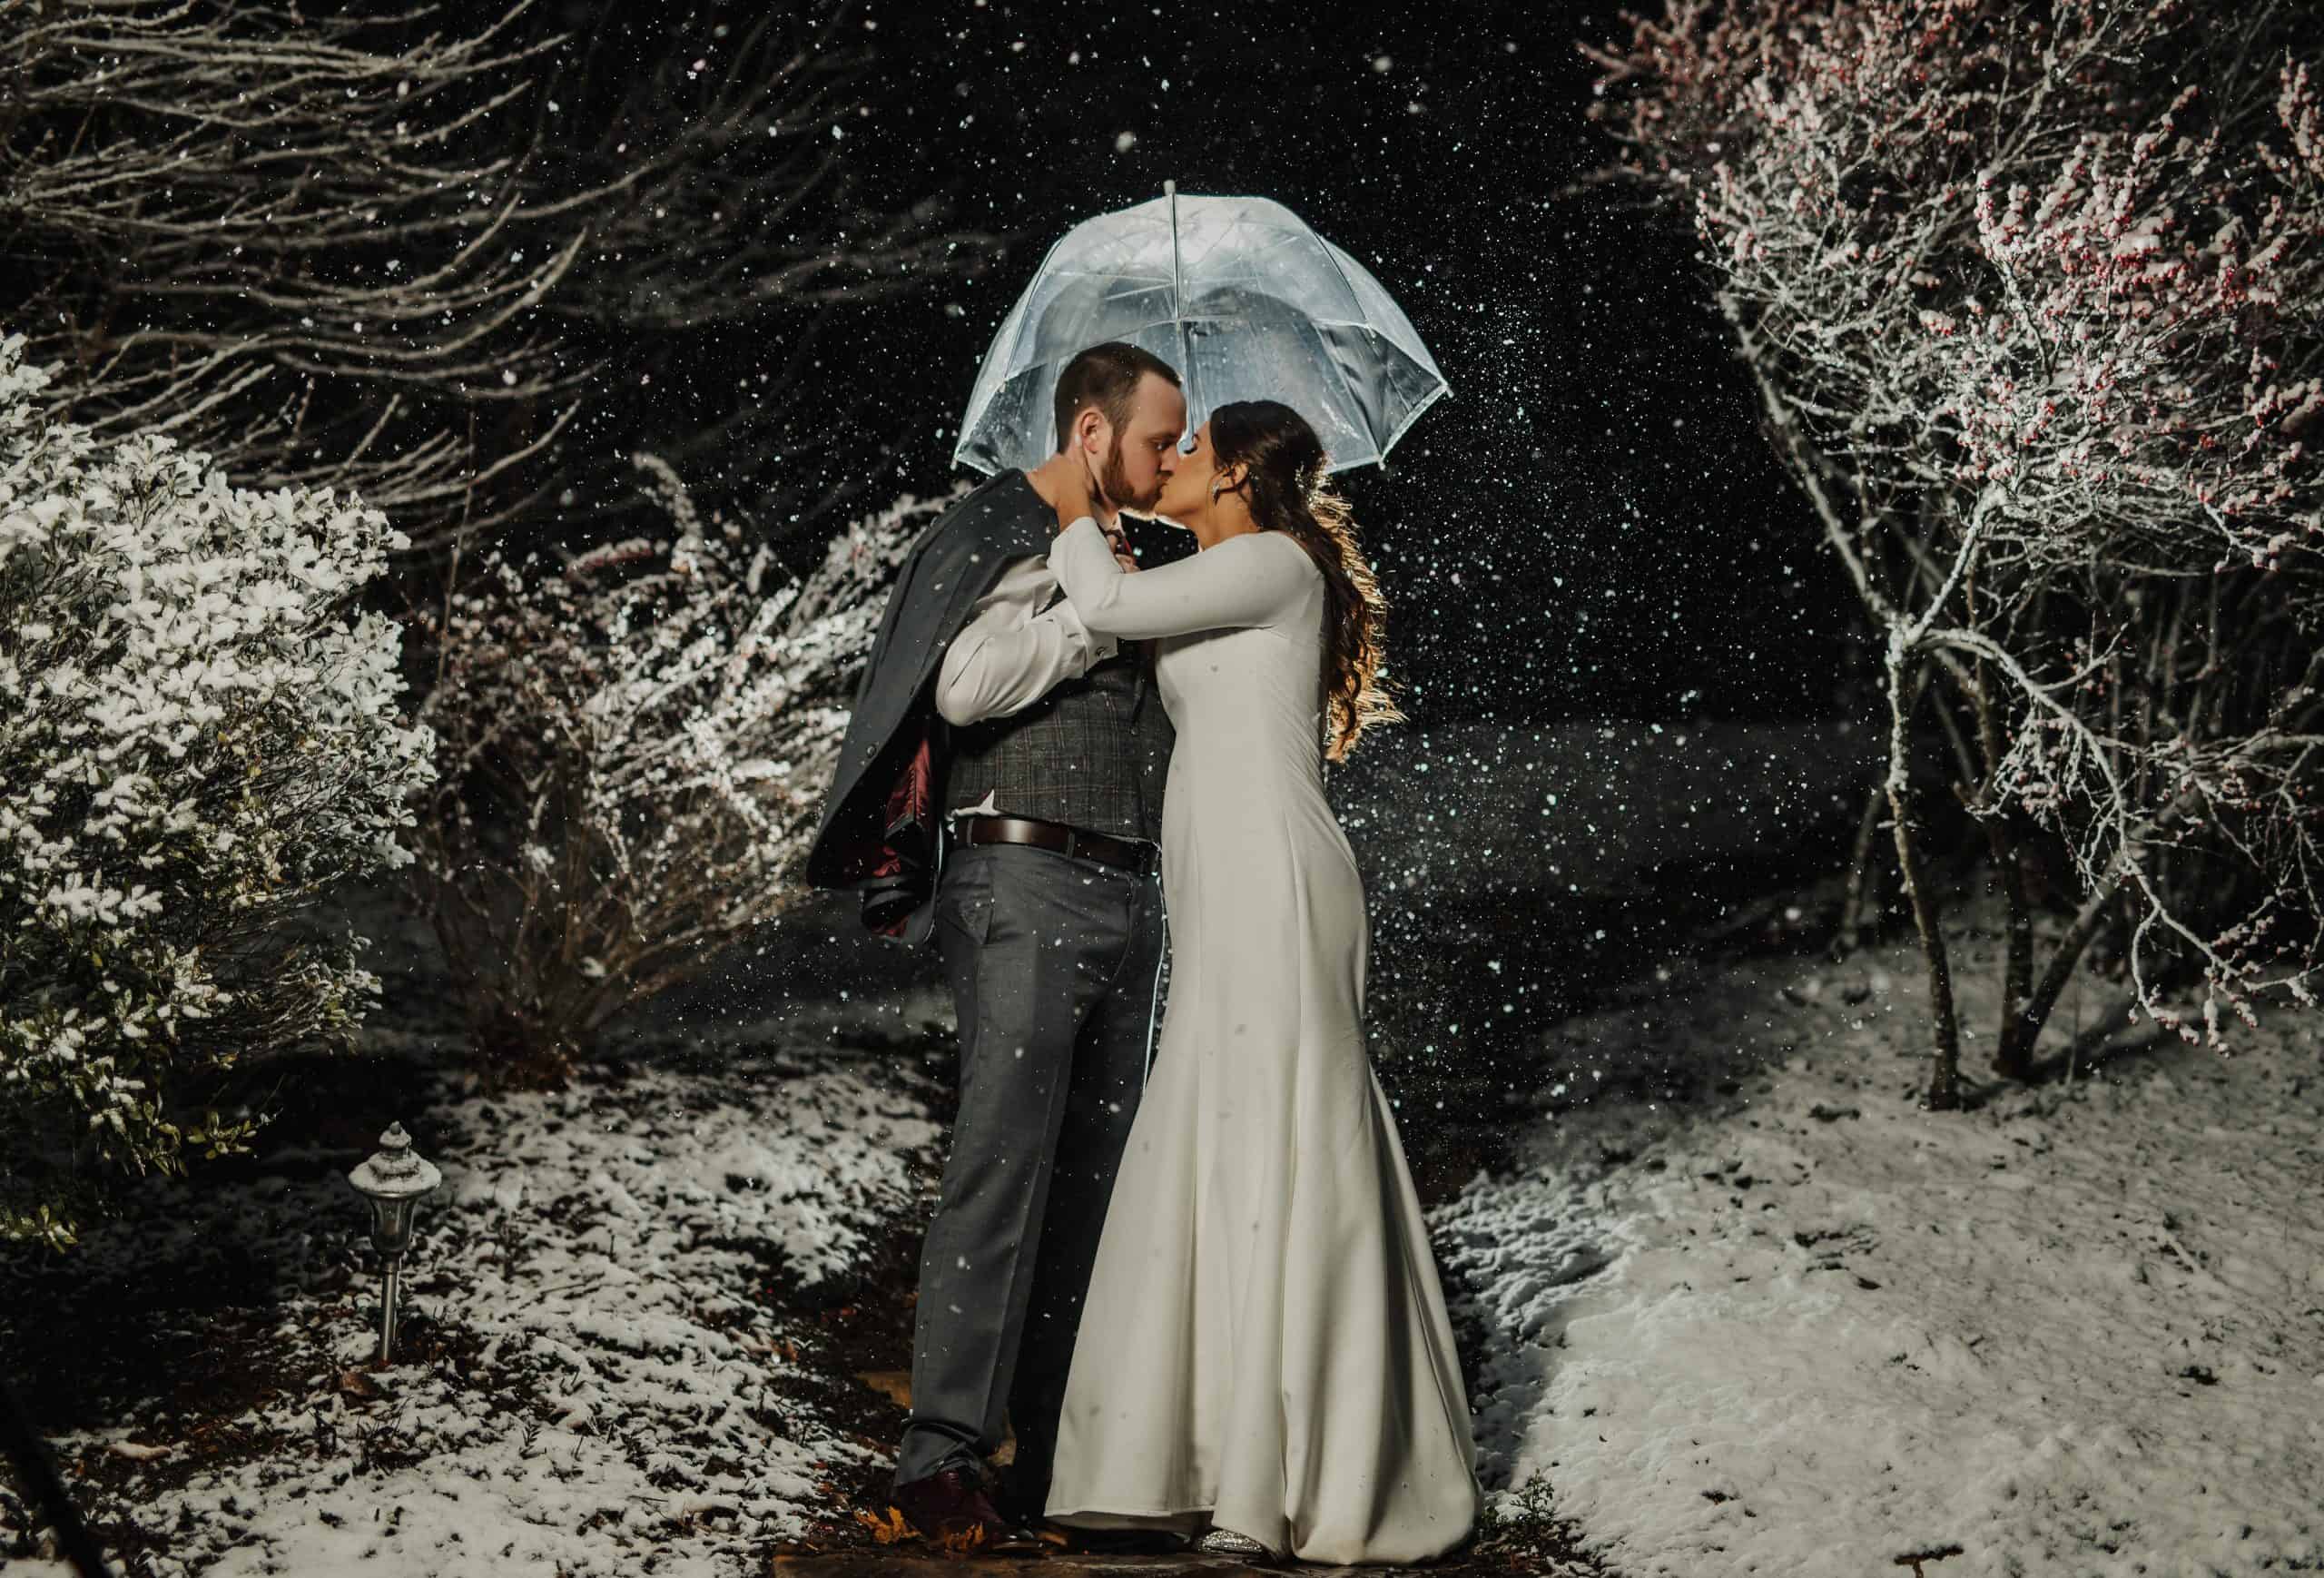 Winter wedding picture courtesy of: DiPietro Weddings: Photography & Films LLC